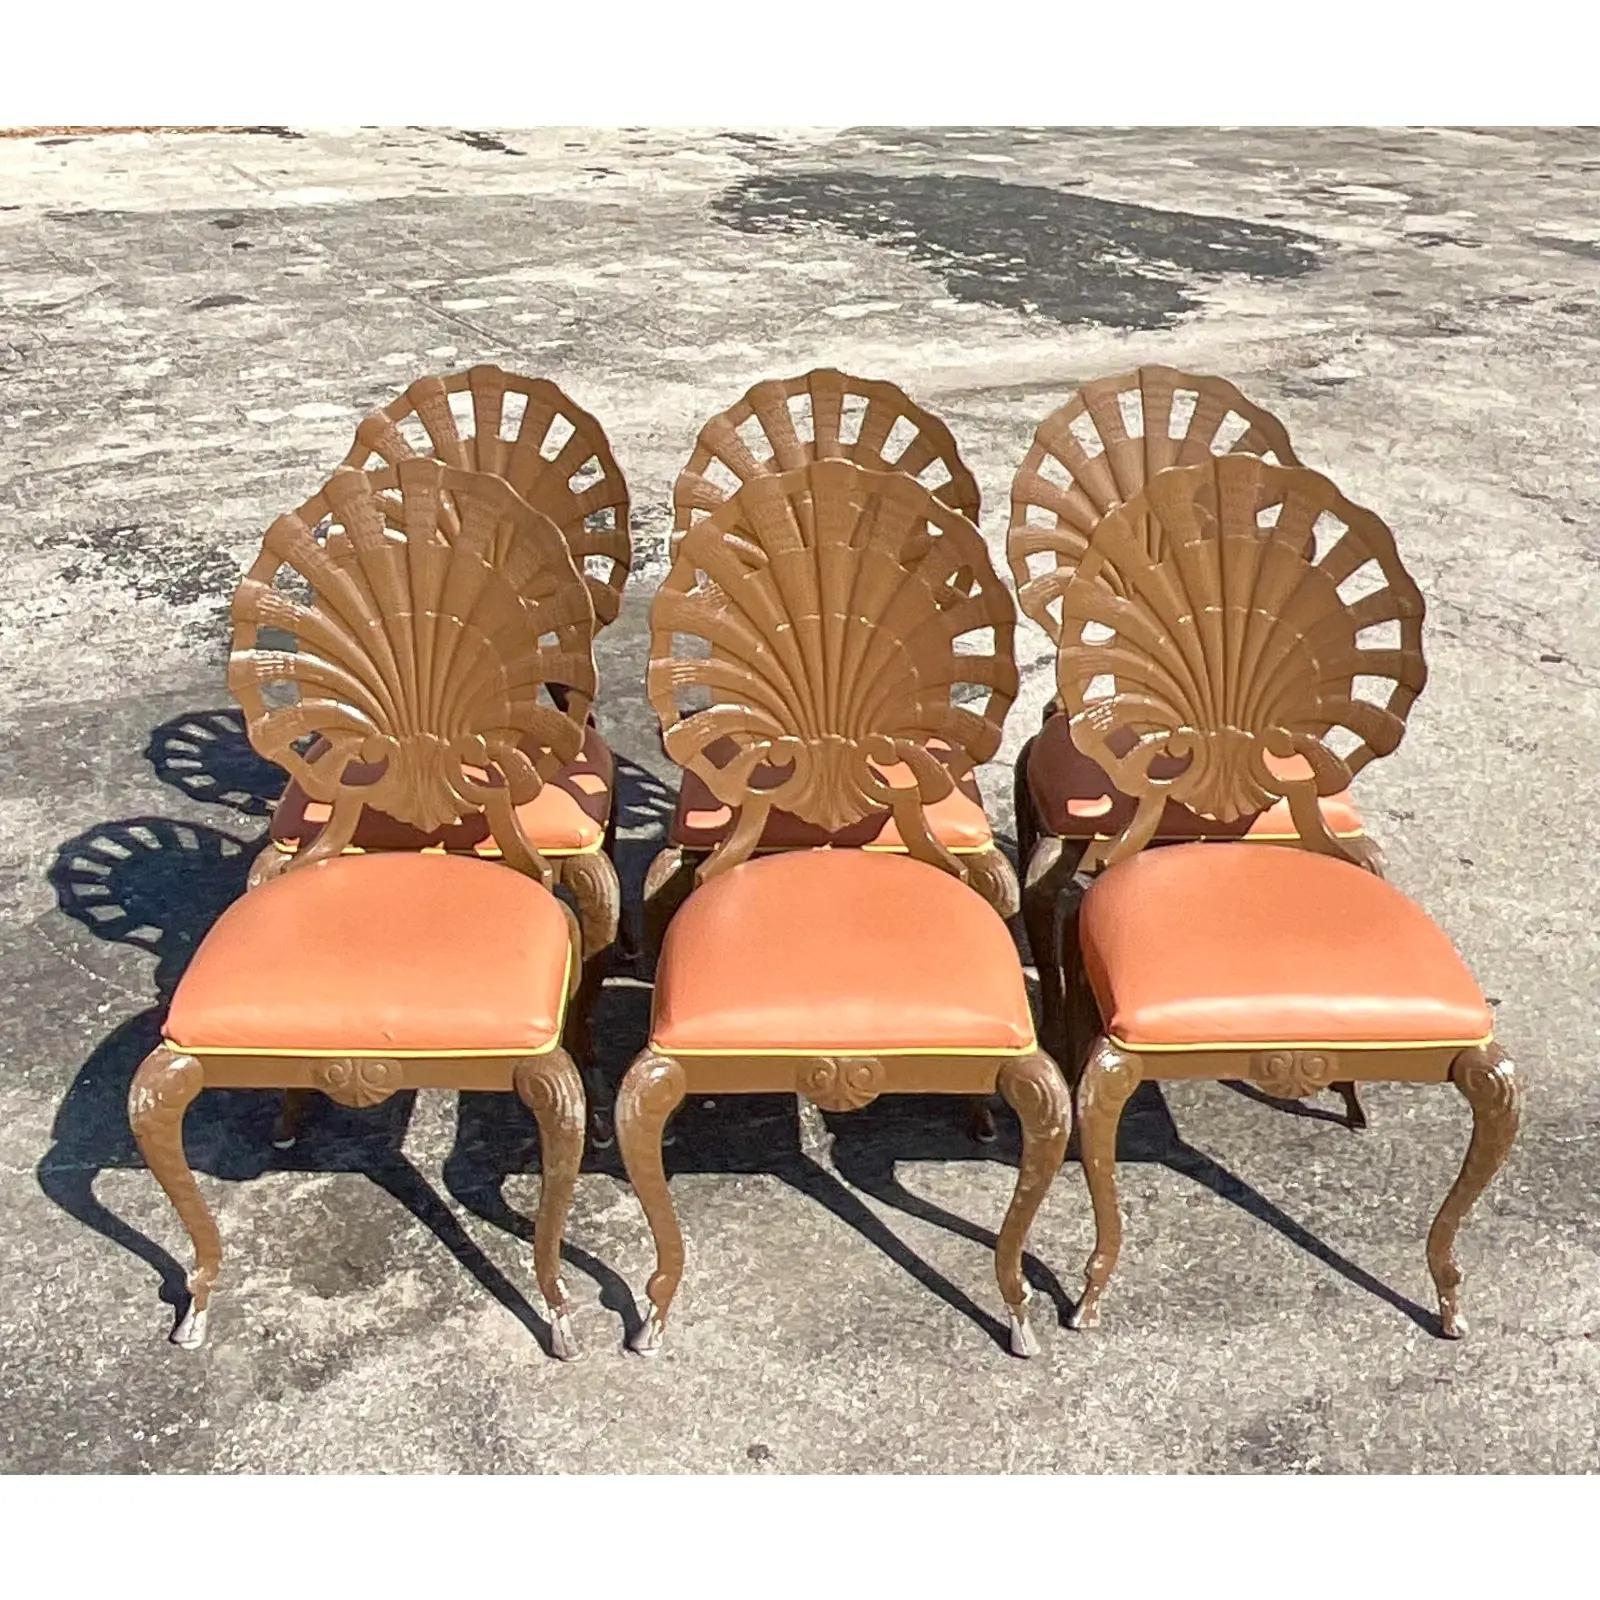 Fantastic set of 6 cast aluminum outdoor dining chairs. Made by the iconic Brown Jordan. Beautiful shell back grotto design. Perfect as is or update to your colors. You decide! Unmarked. Acquired from a Palm beach estate.